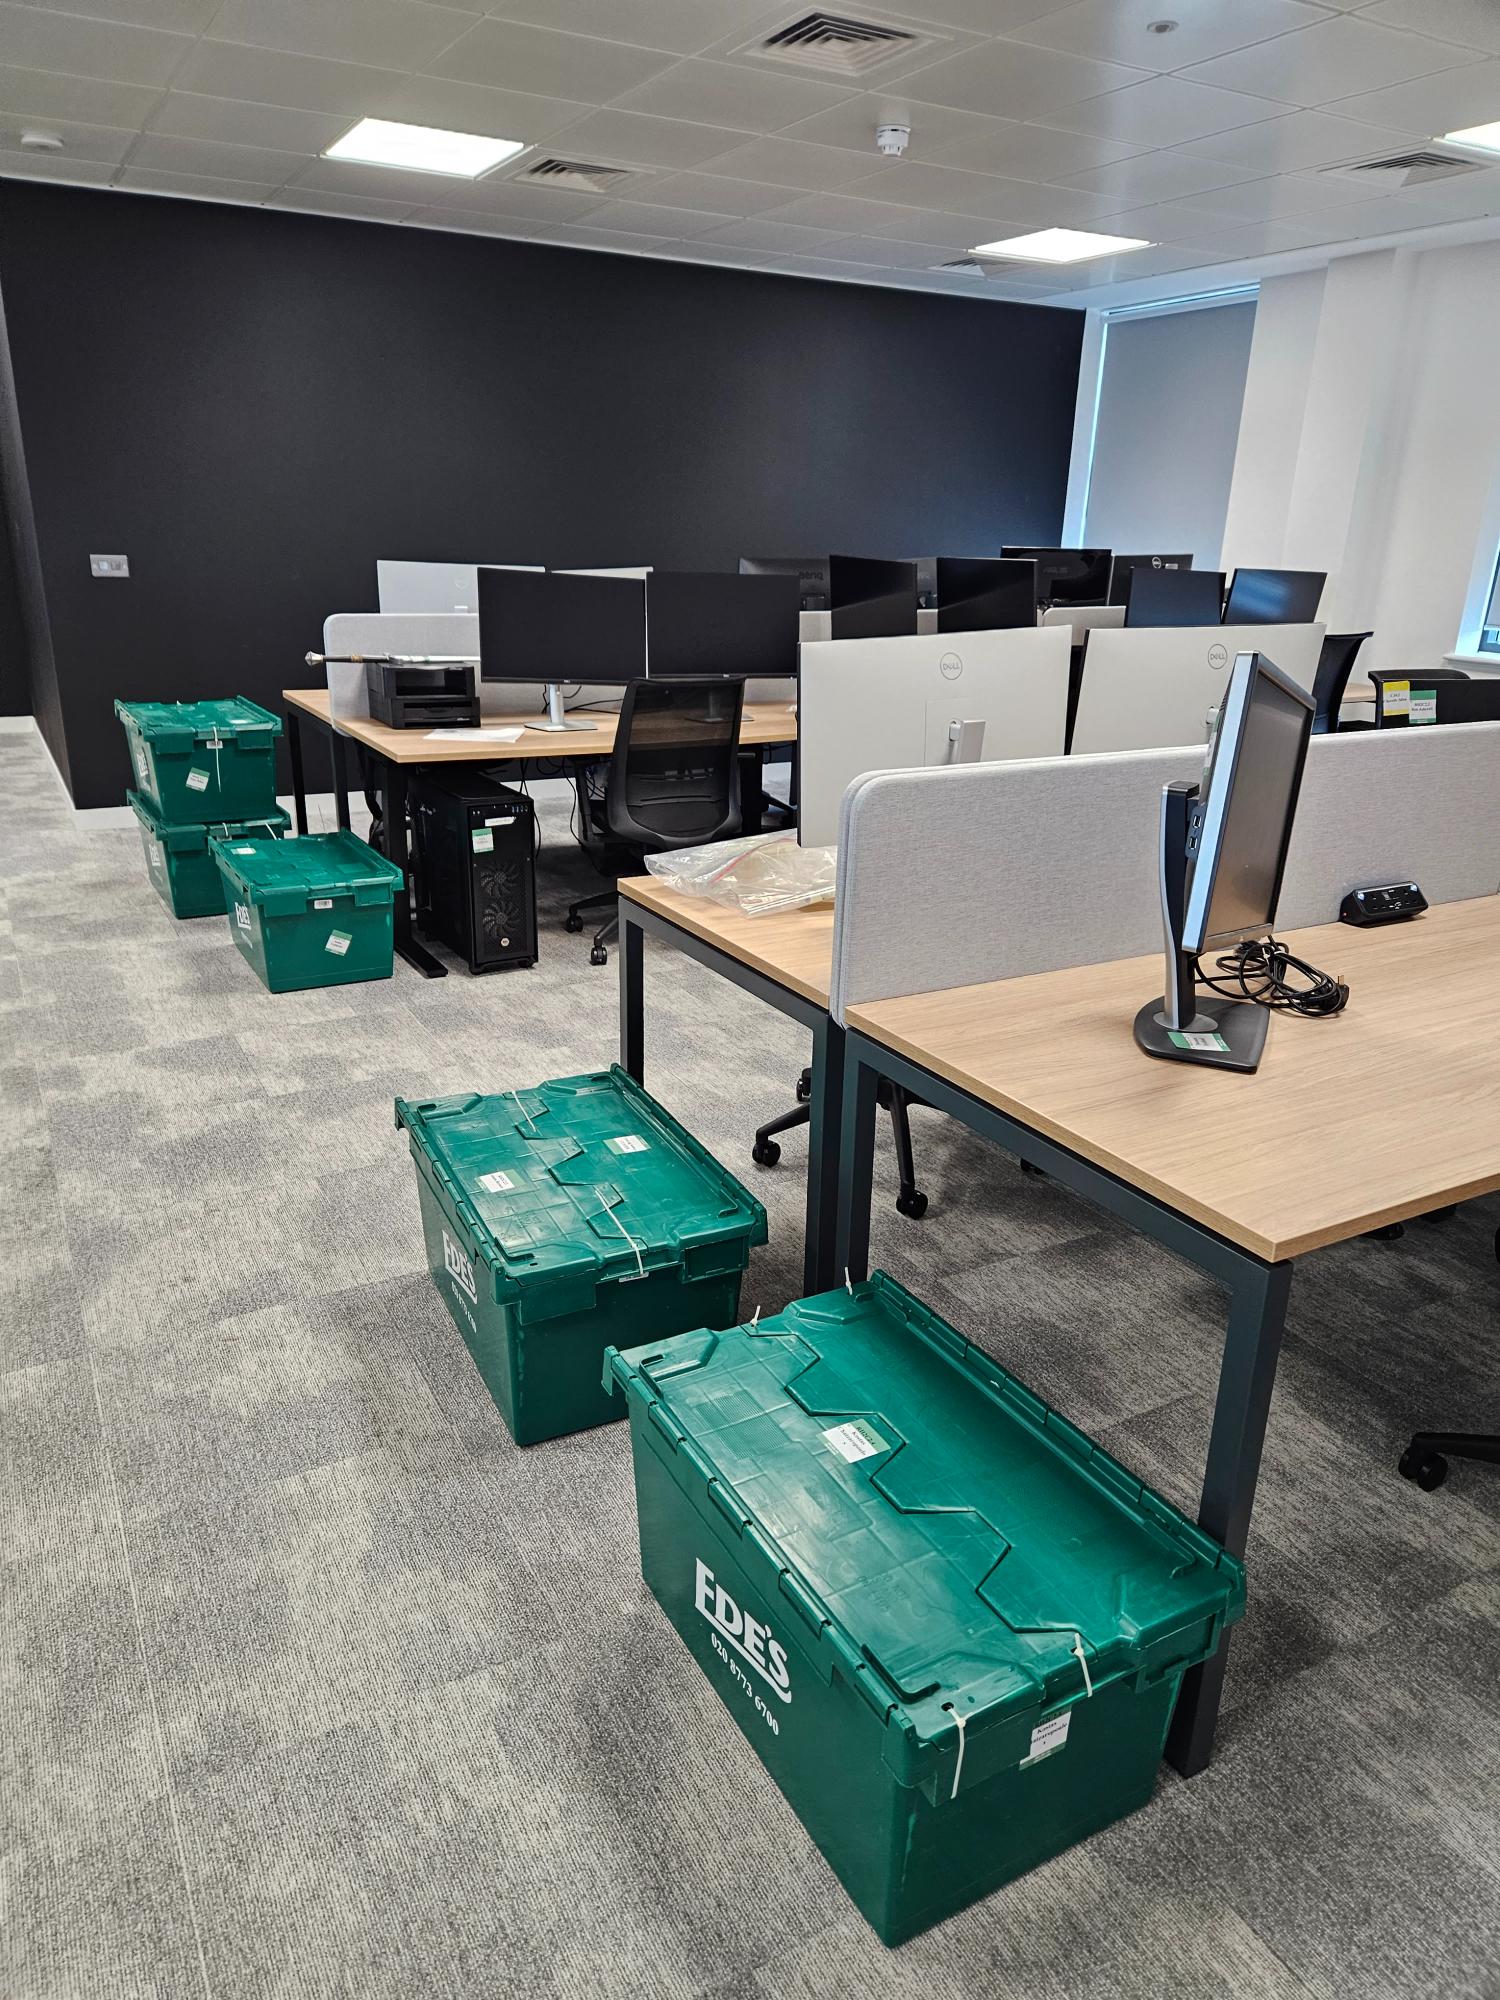 An office with desks, computer monitors, and several green plastic crates labeled "EDES" placed on the floor.